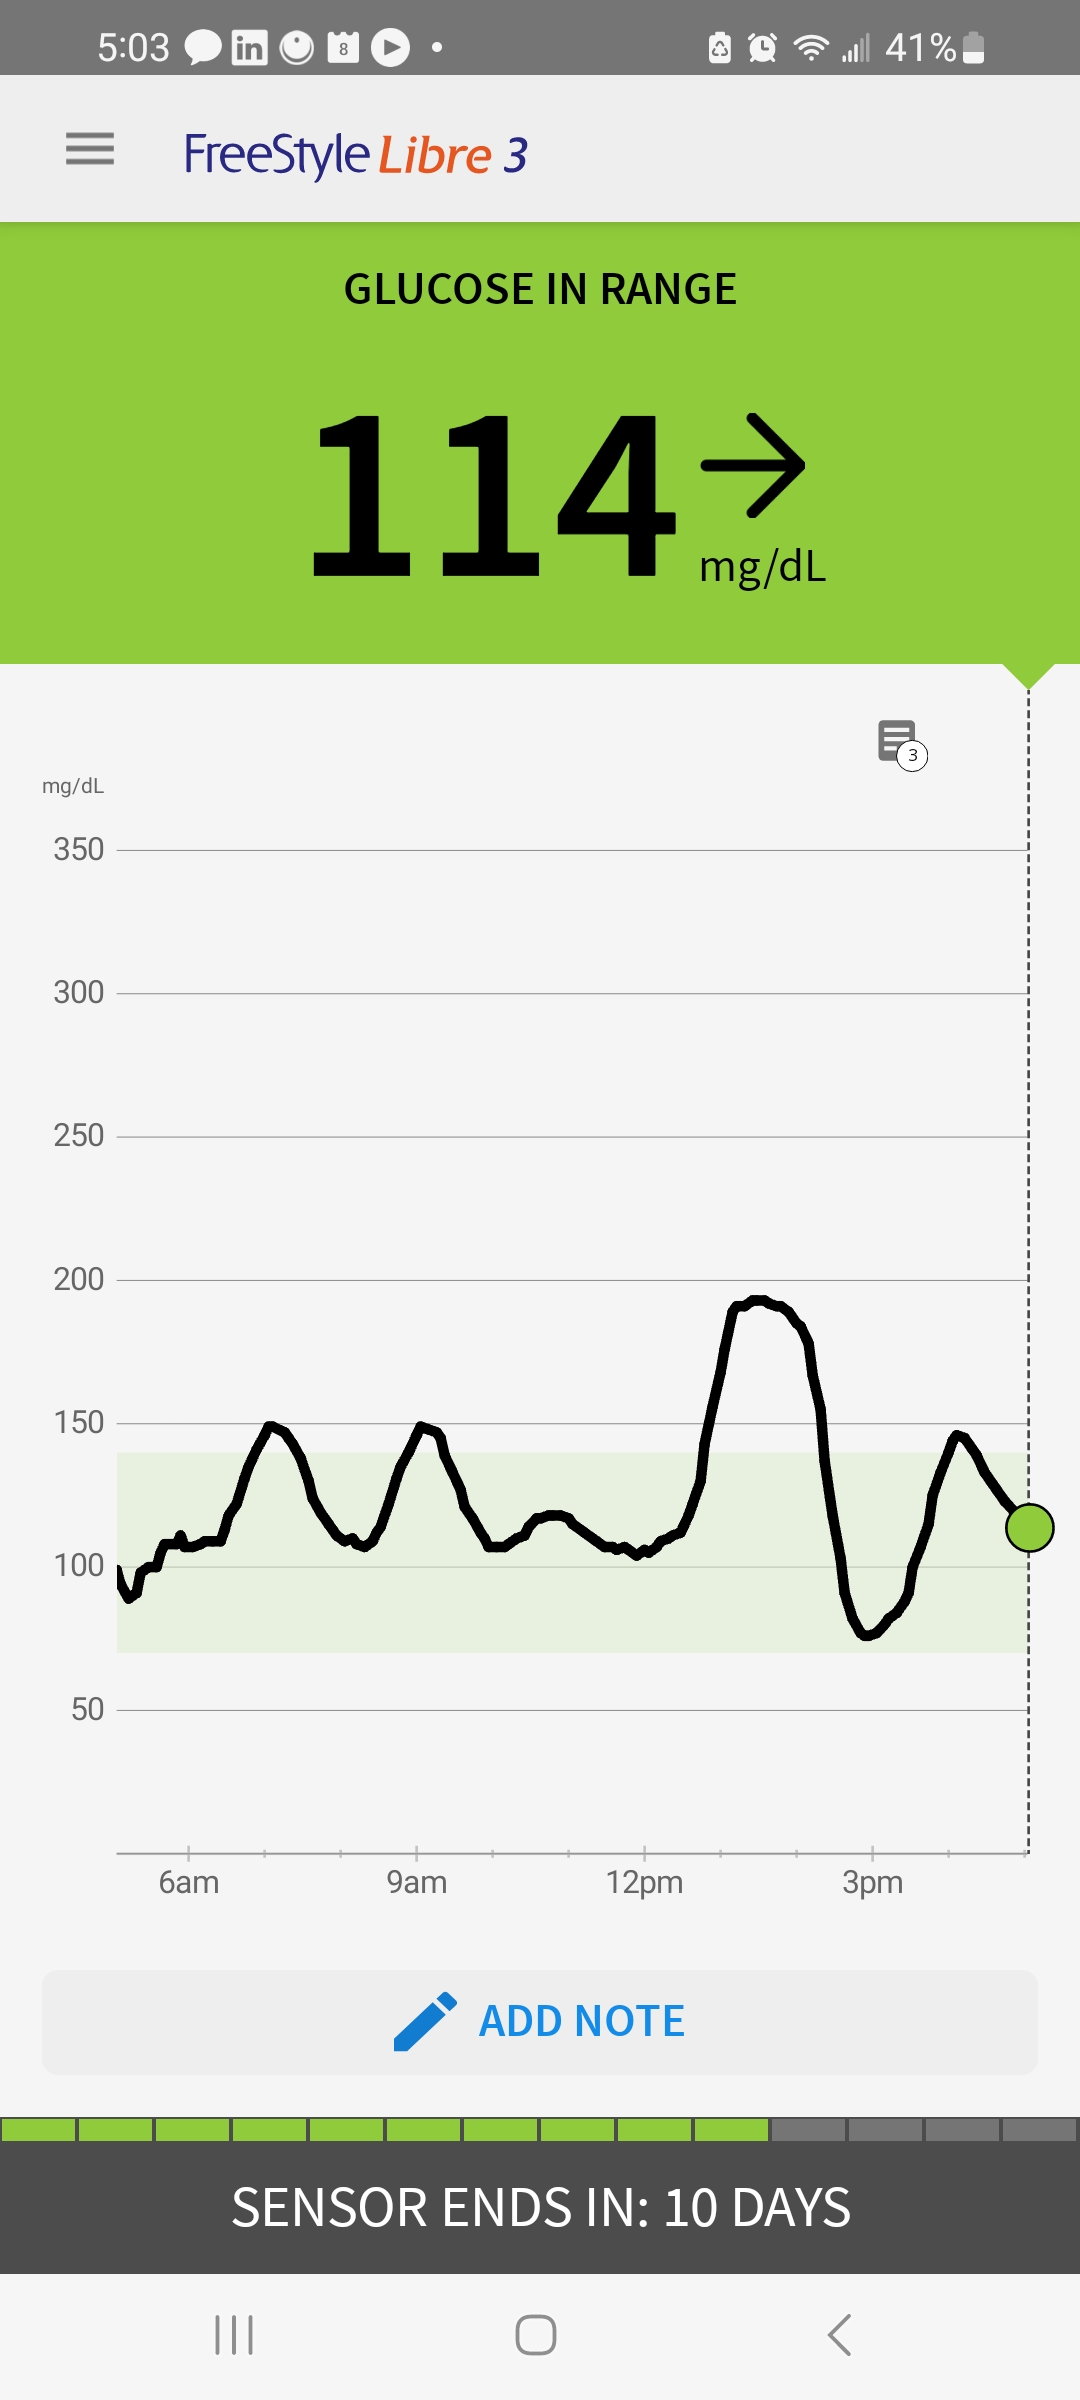 CGM screen showing drop in blood sugar after exercise